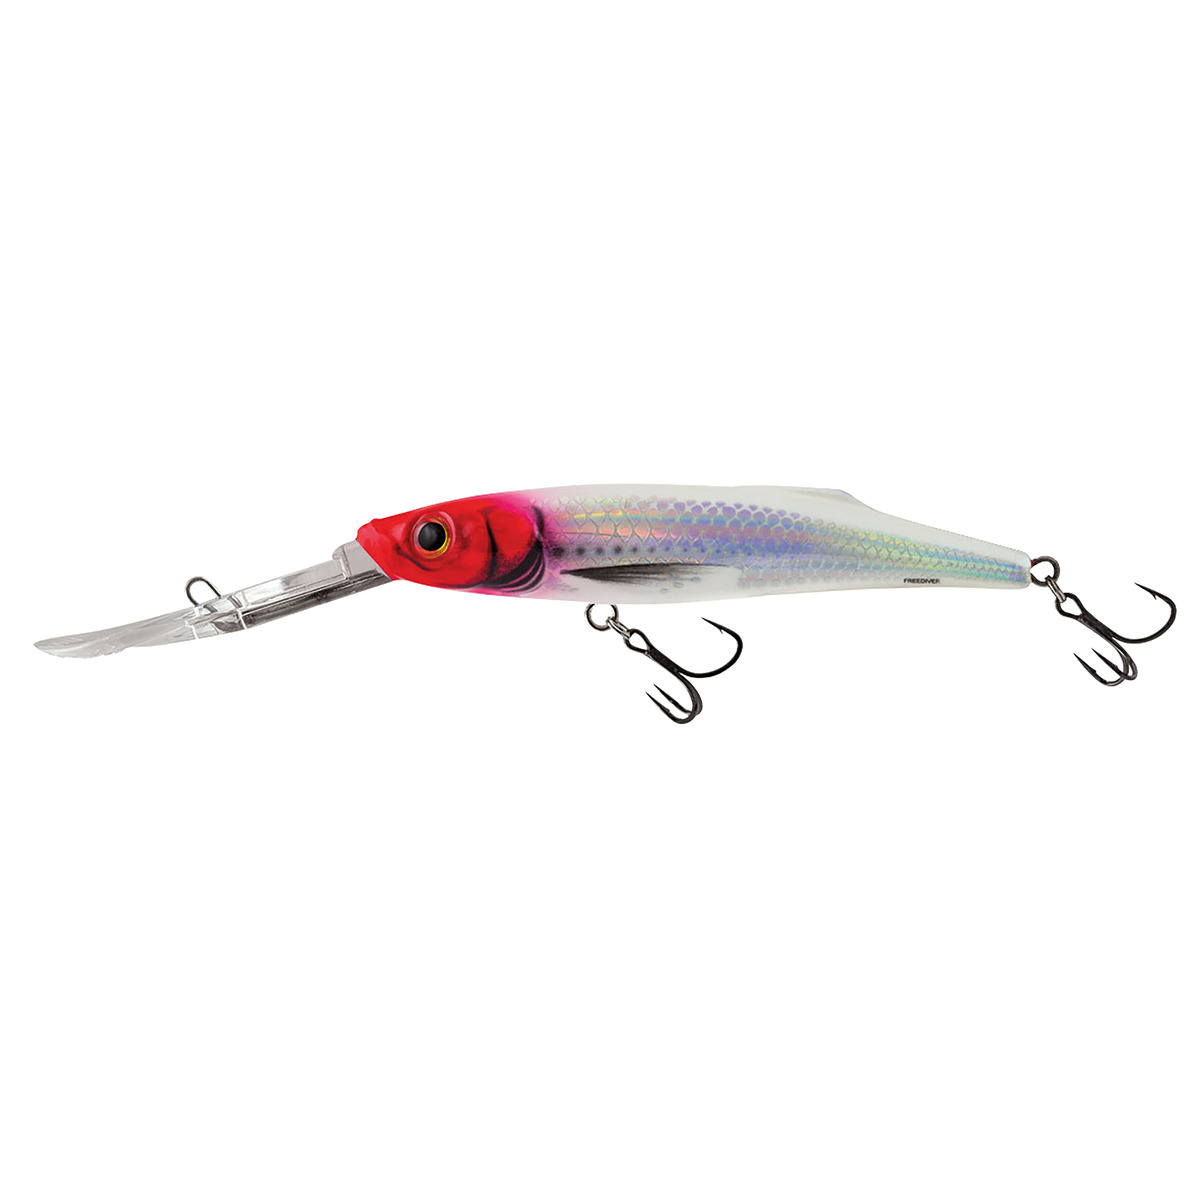 Salmo Freediver Super Deep Runner - 7 Cm - Holographic Red Head